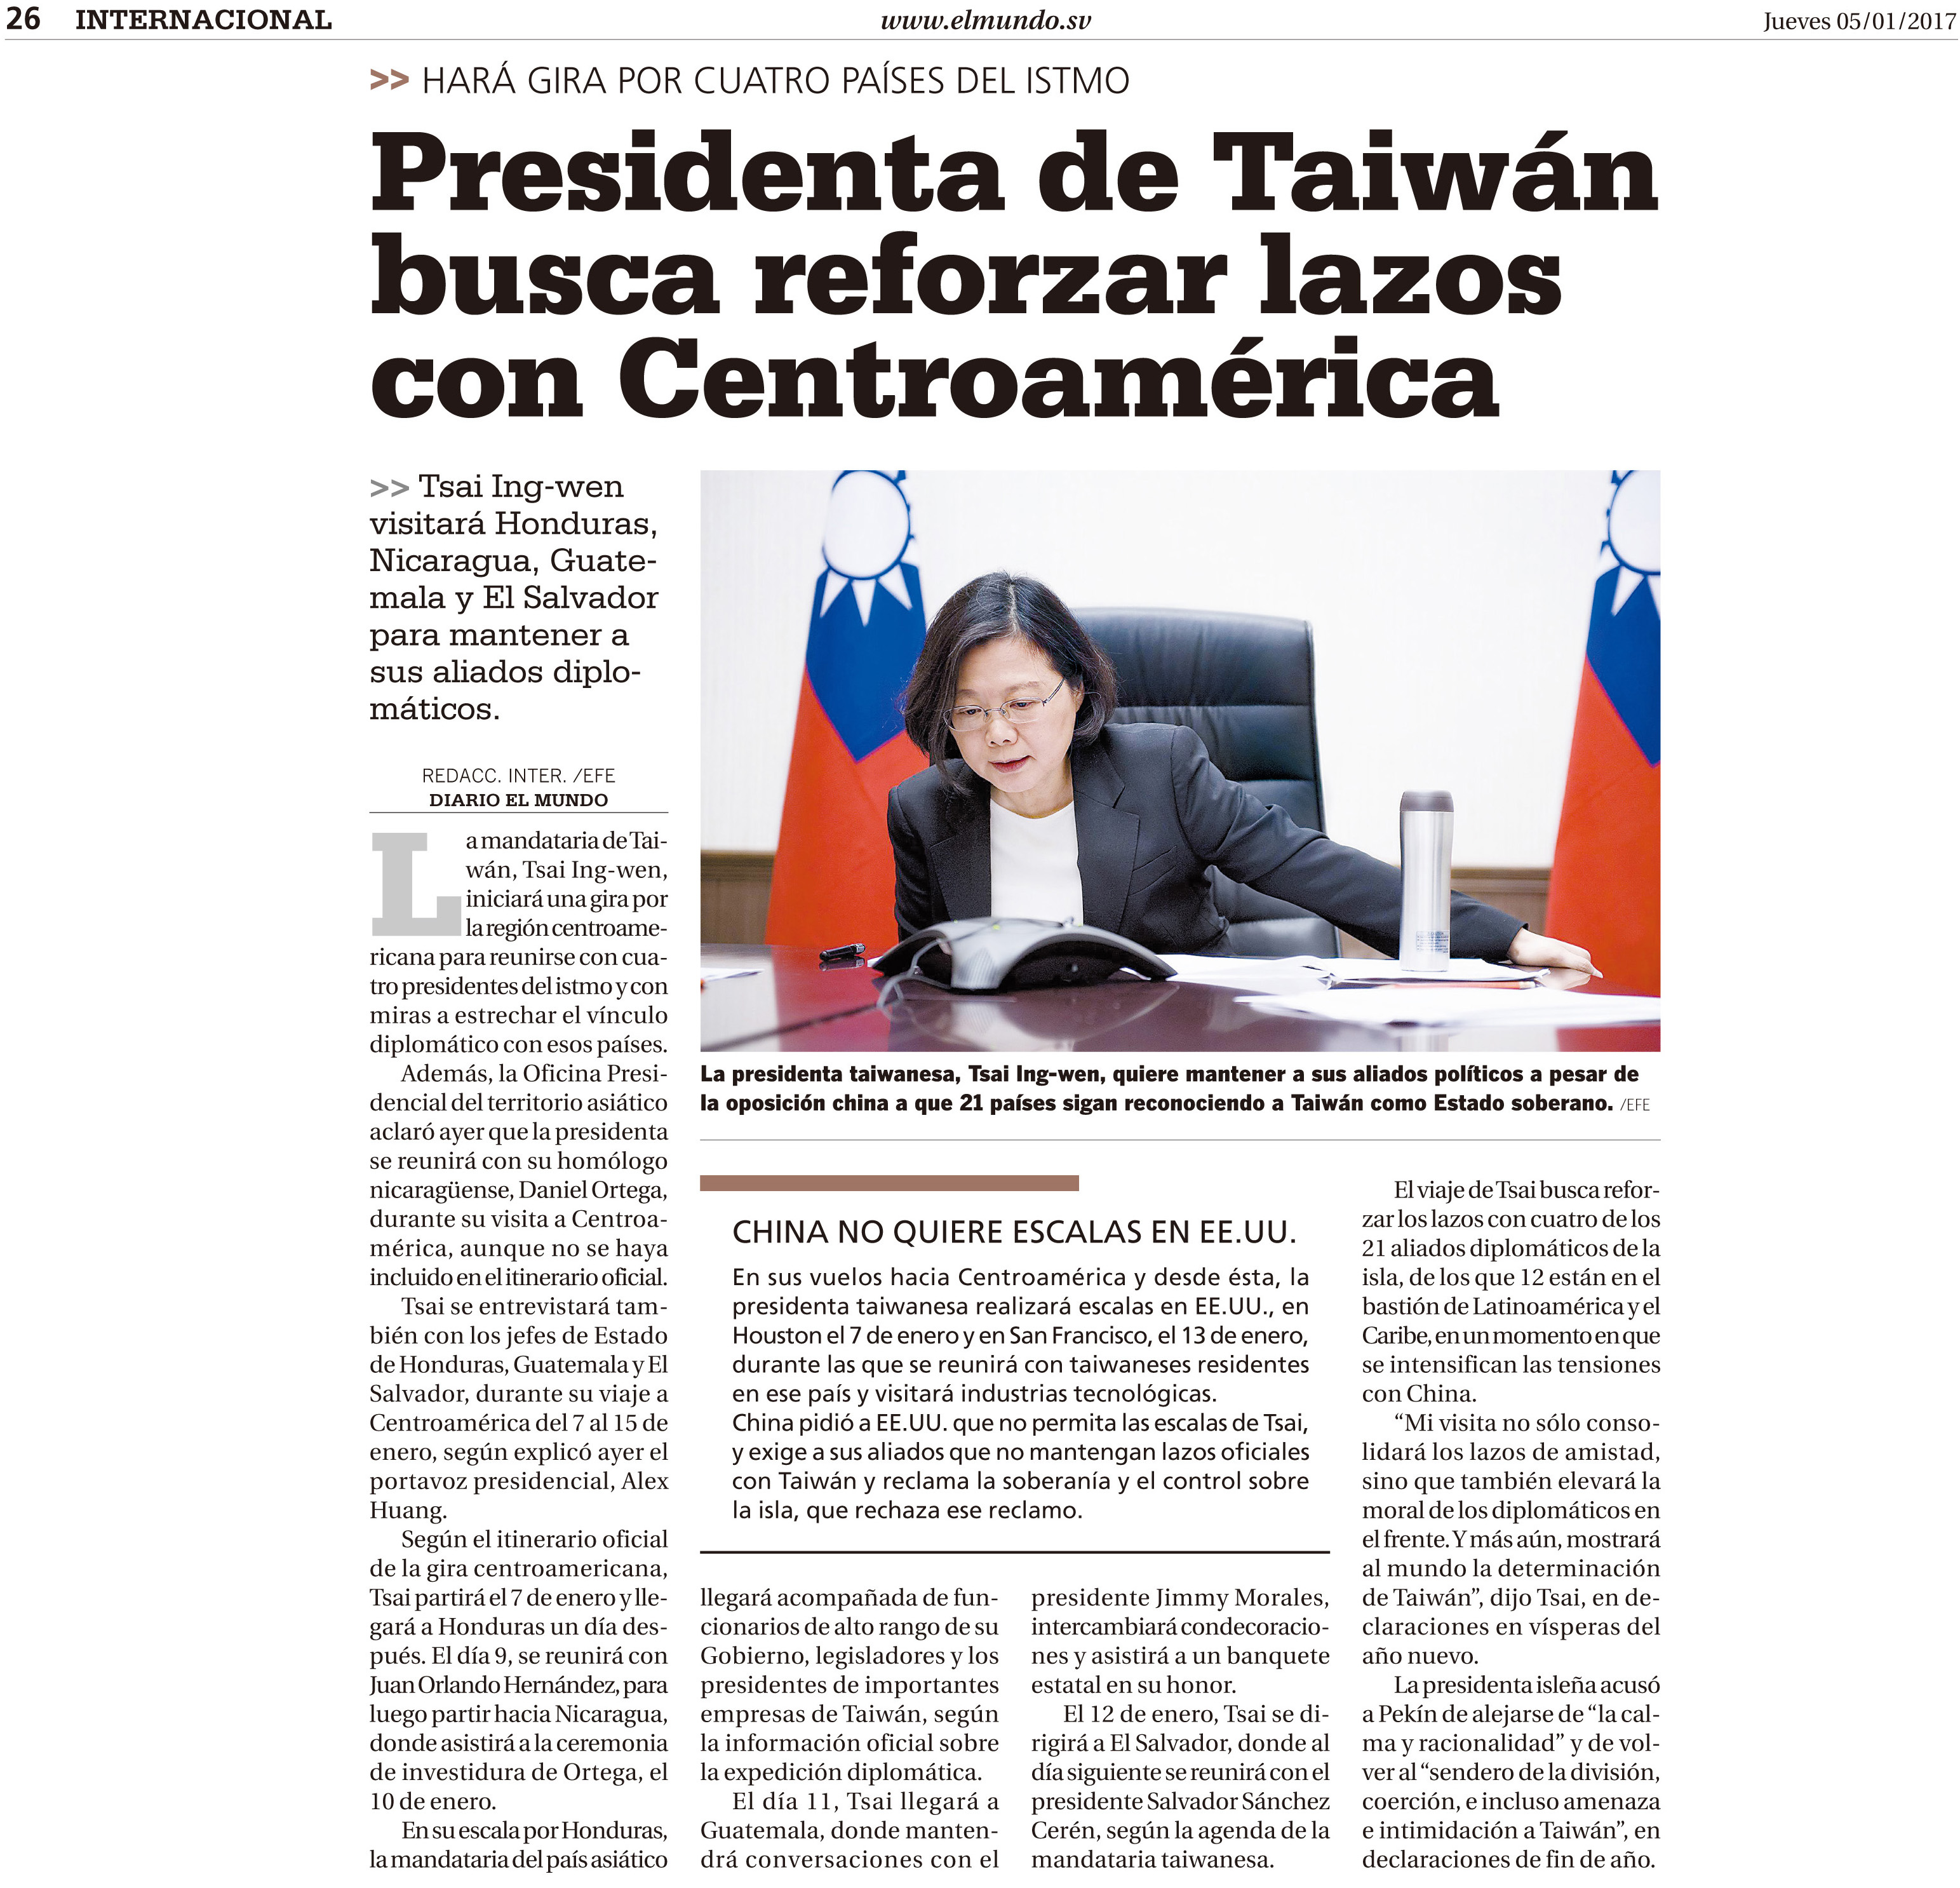 President of Taiwan seeks to strengthen ties with Central America